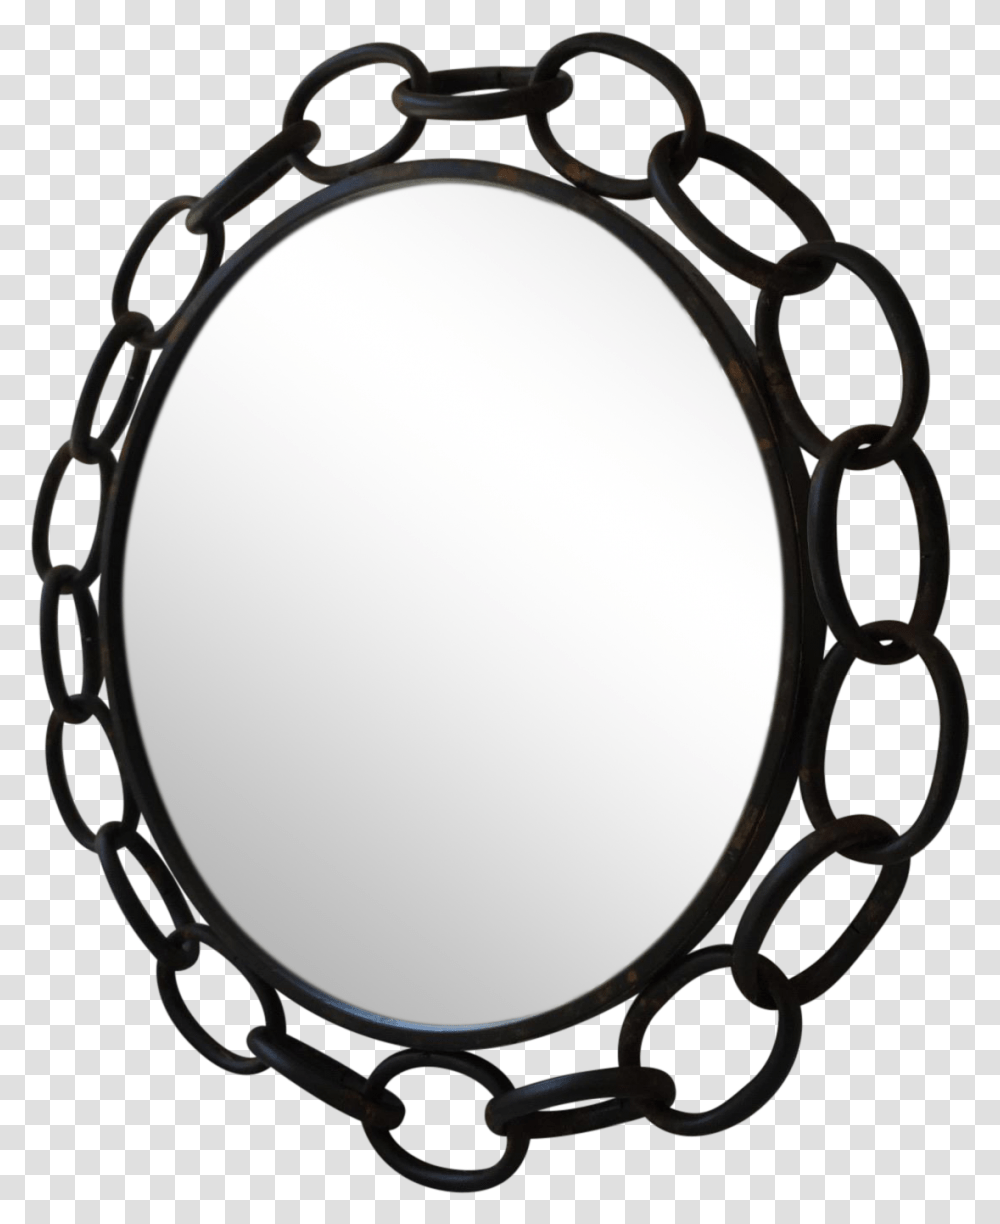 Circle Clipart Chain Link Clip Art Download Full Circle, Sunglasses, Accessories, Accessory, Oval Transparent Png